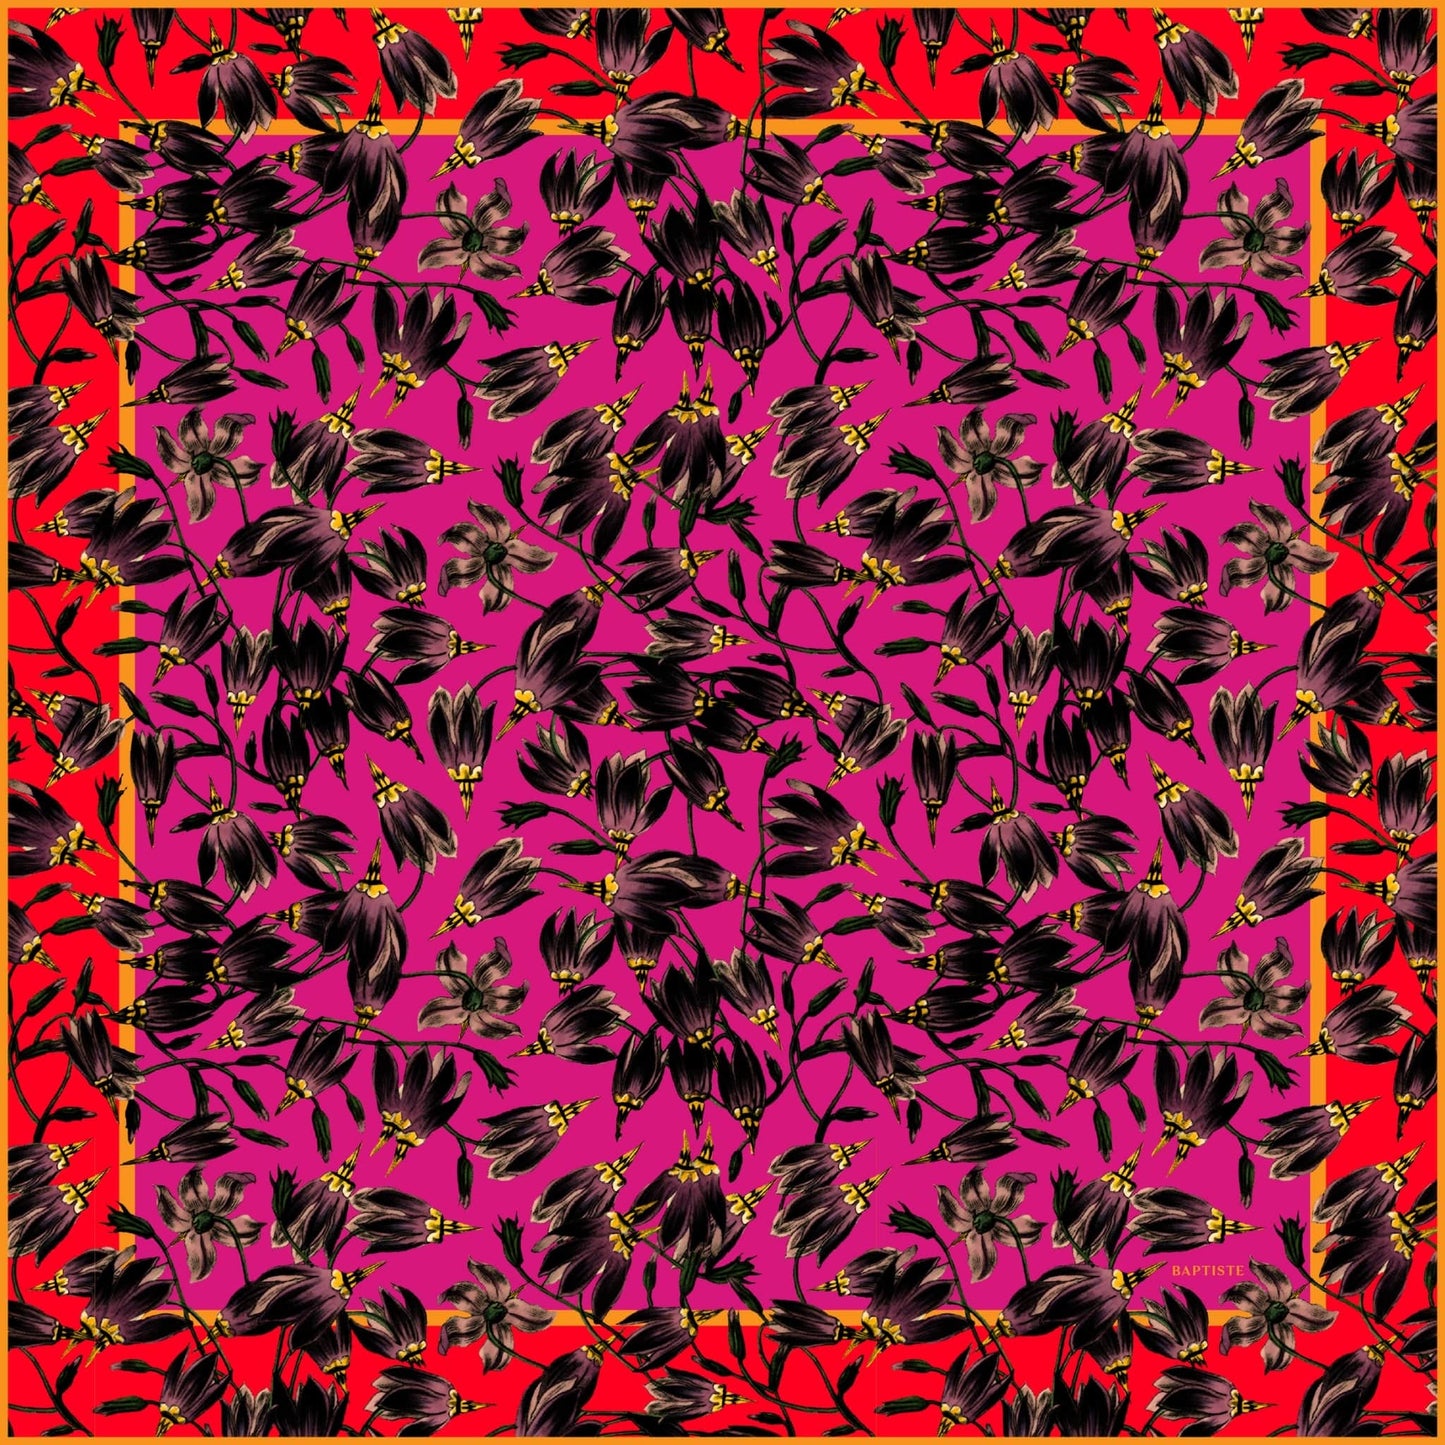 BAPTISTE Scarves Pink / Red / Square Scarf Pasque Print Silk Satin Scarf - Pink